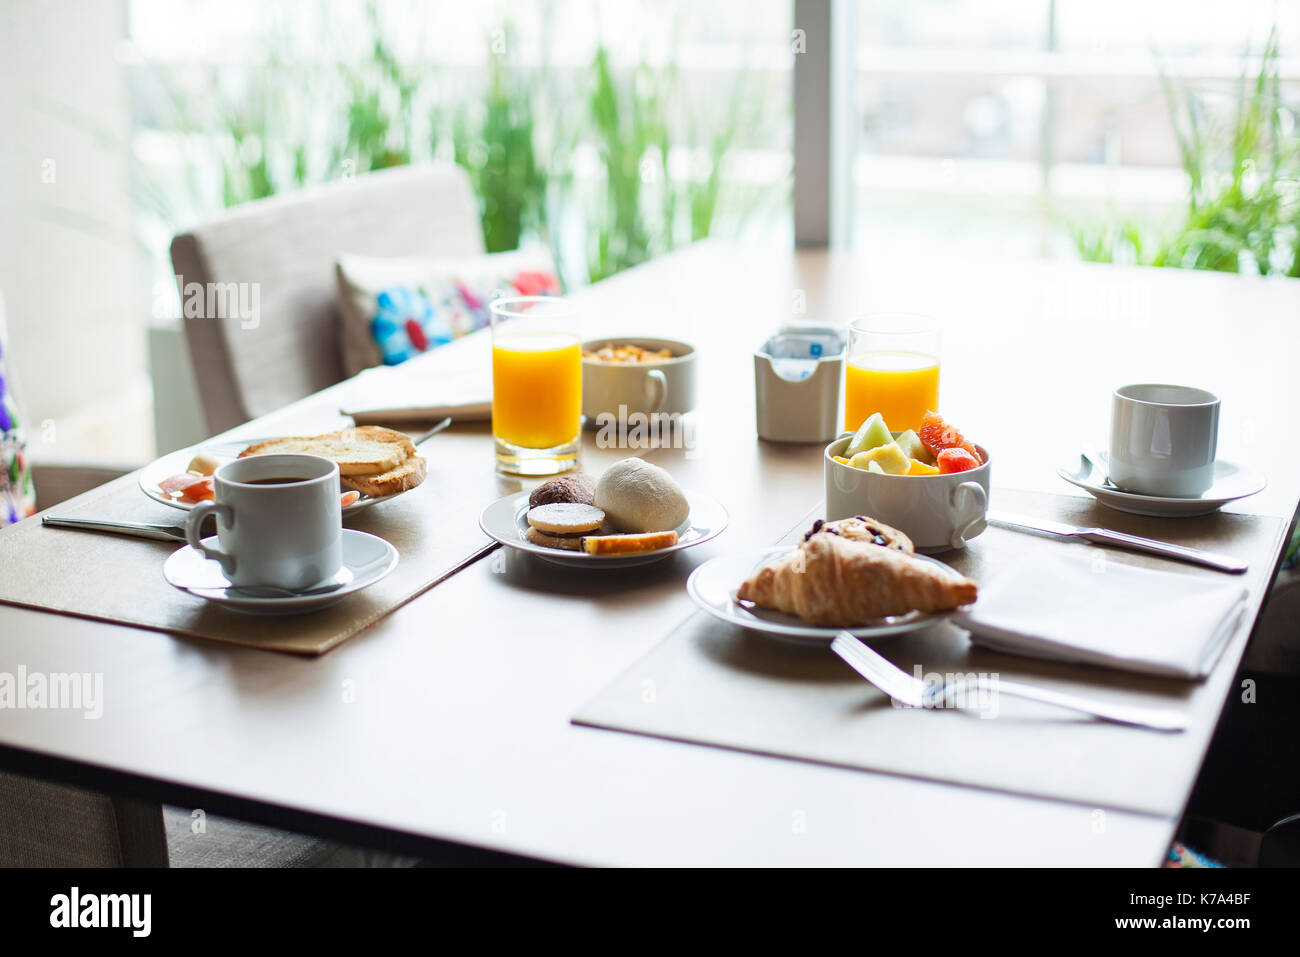 Breakfast of fruit and pastries on cafe table Stock Photo